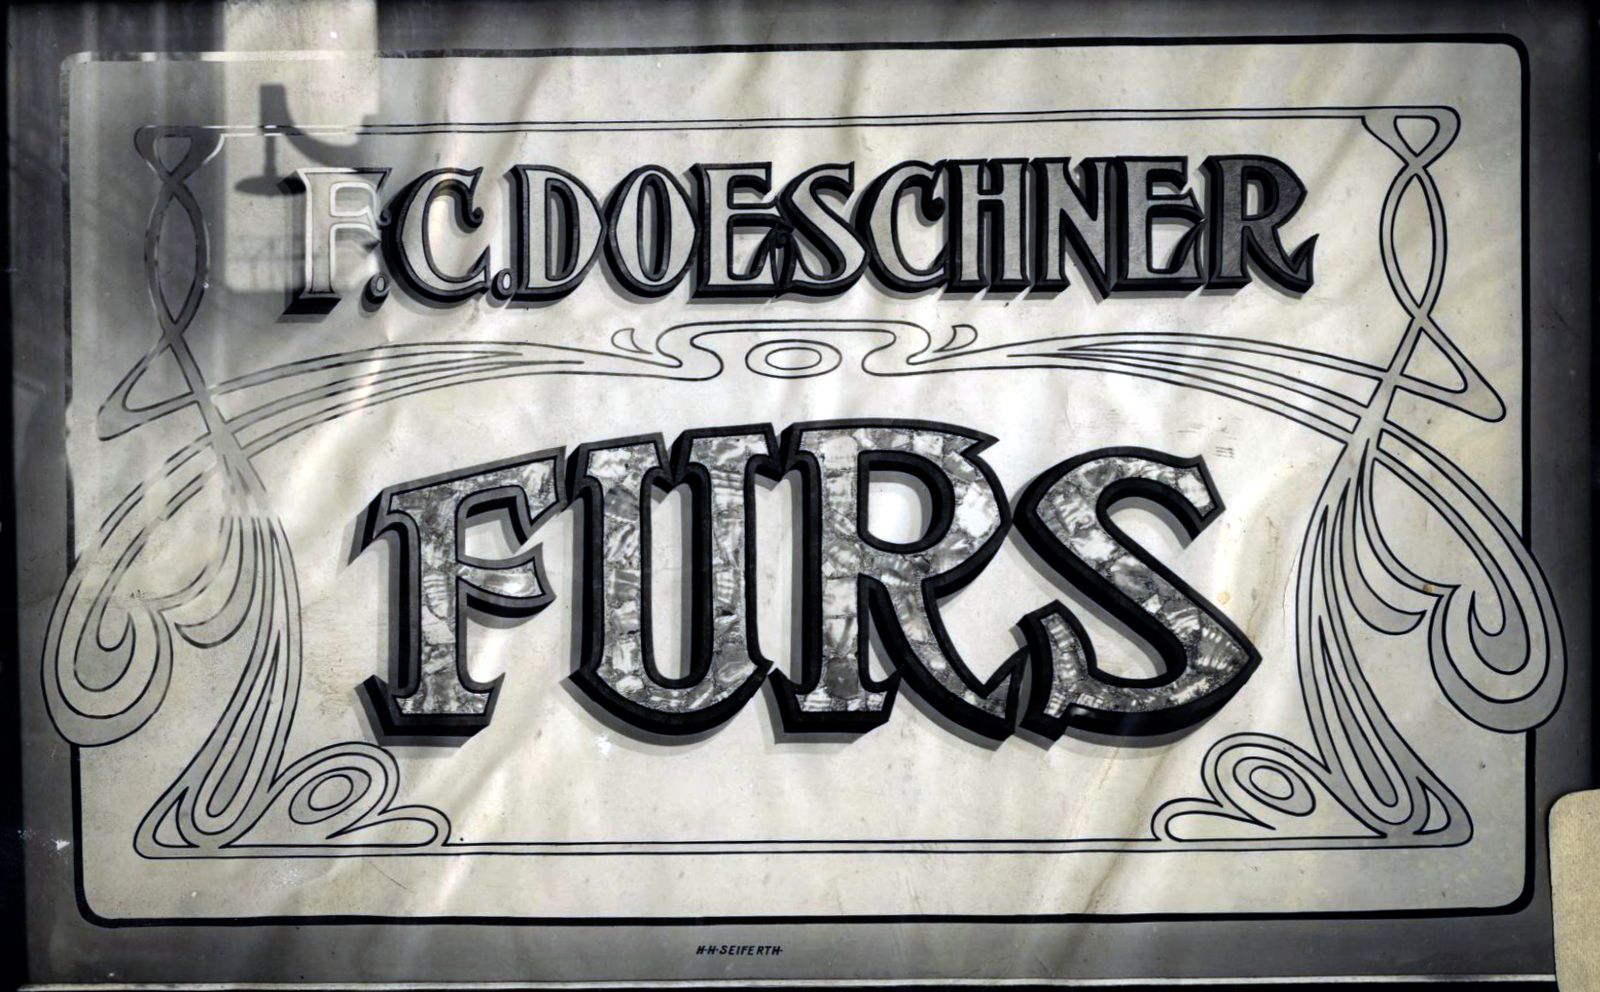 Decorated glass panel with Art Nouveau decoration surrounding lettering that reads "F.C. Doeschner Furs".